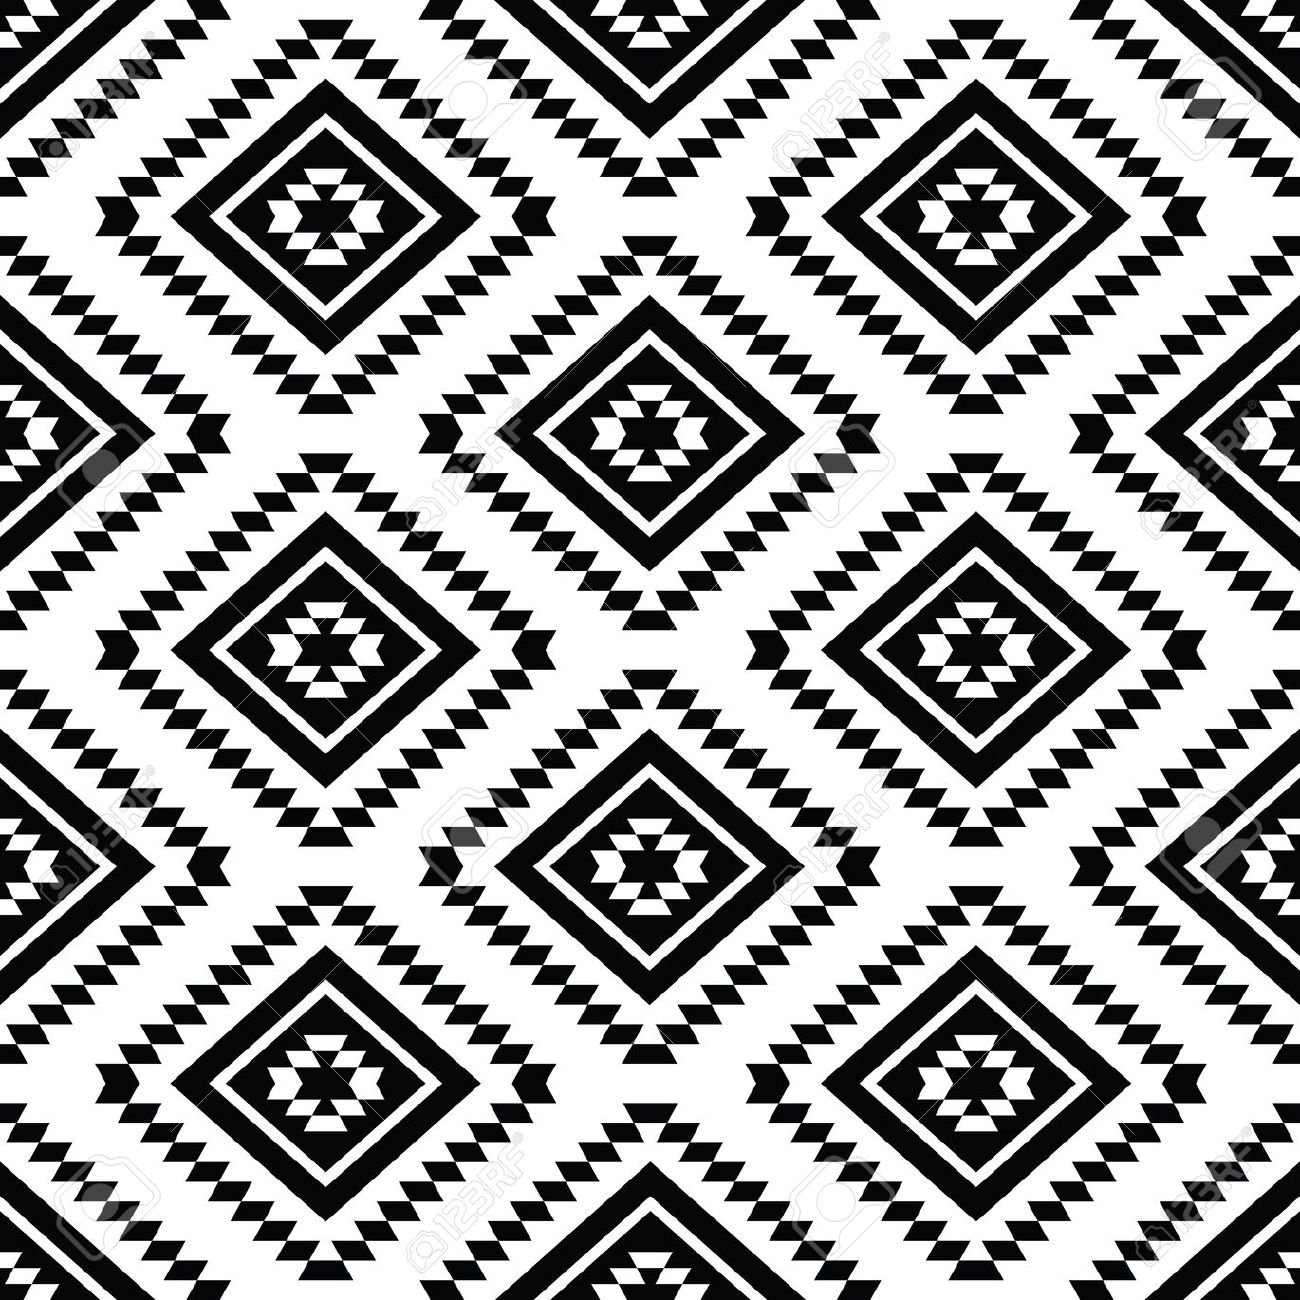 aztec black and white background